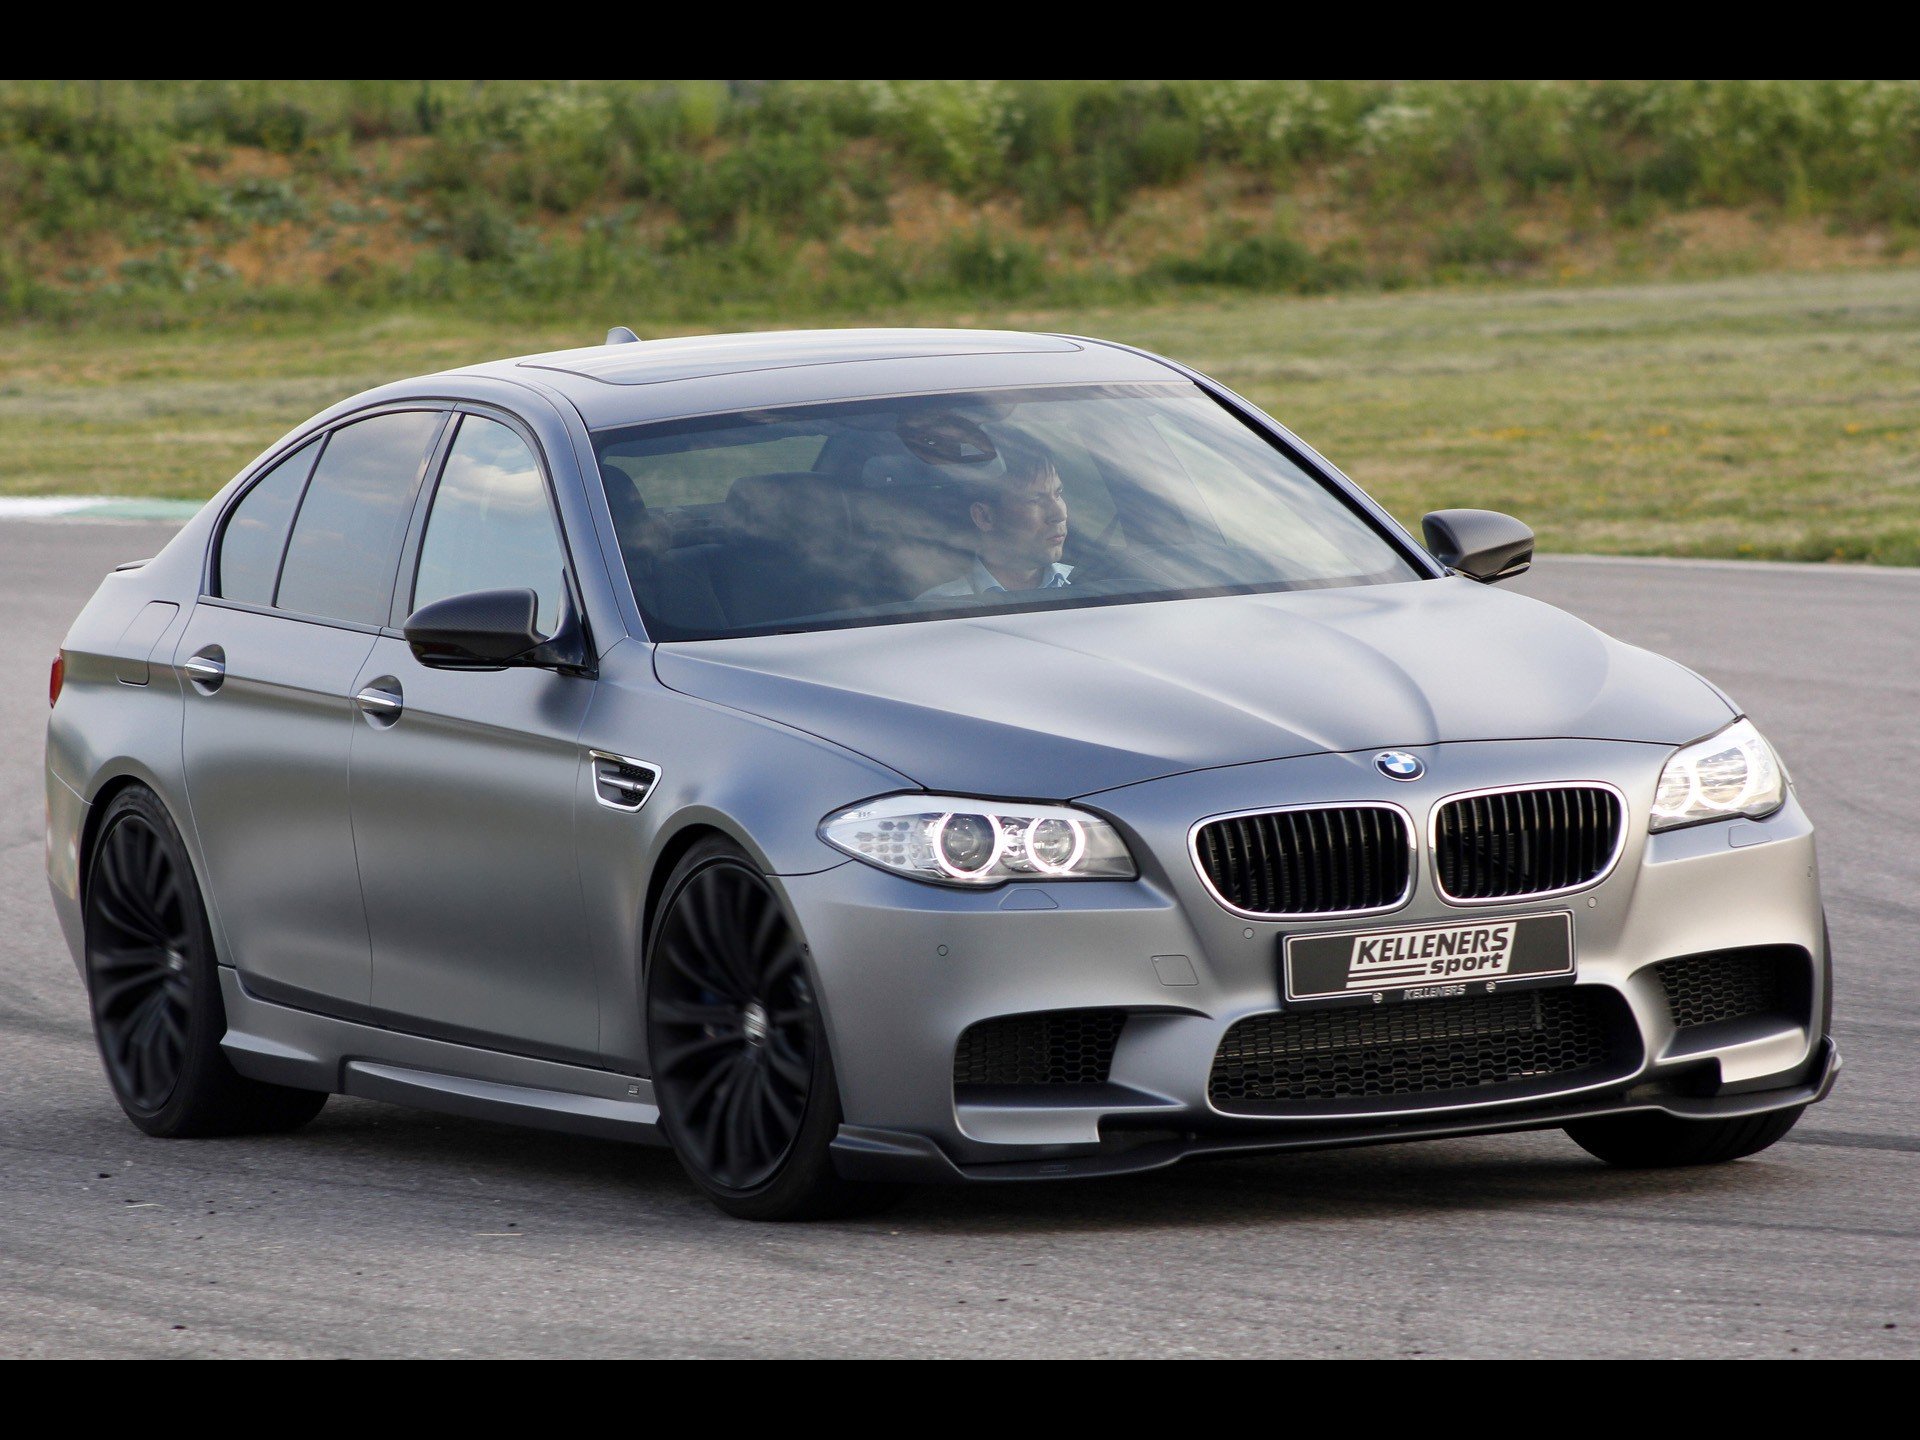 front, Tuning, Motion, Bmw, M5, Bmw, Series, M, Silver, Cars, Kelleners, Sport Wallpaper